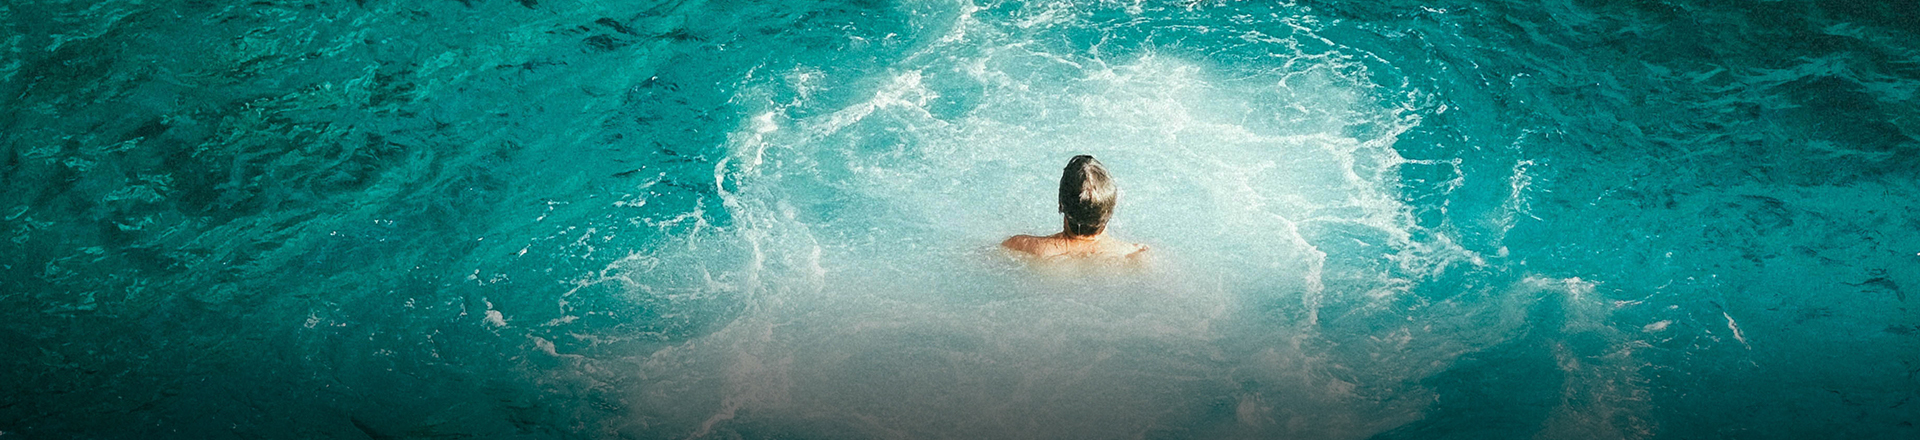 man swimming in crystal blue water with gentle white crash waves